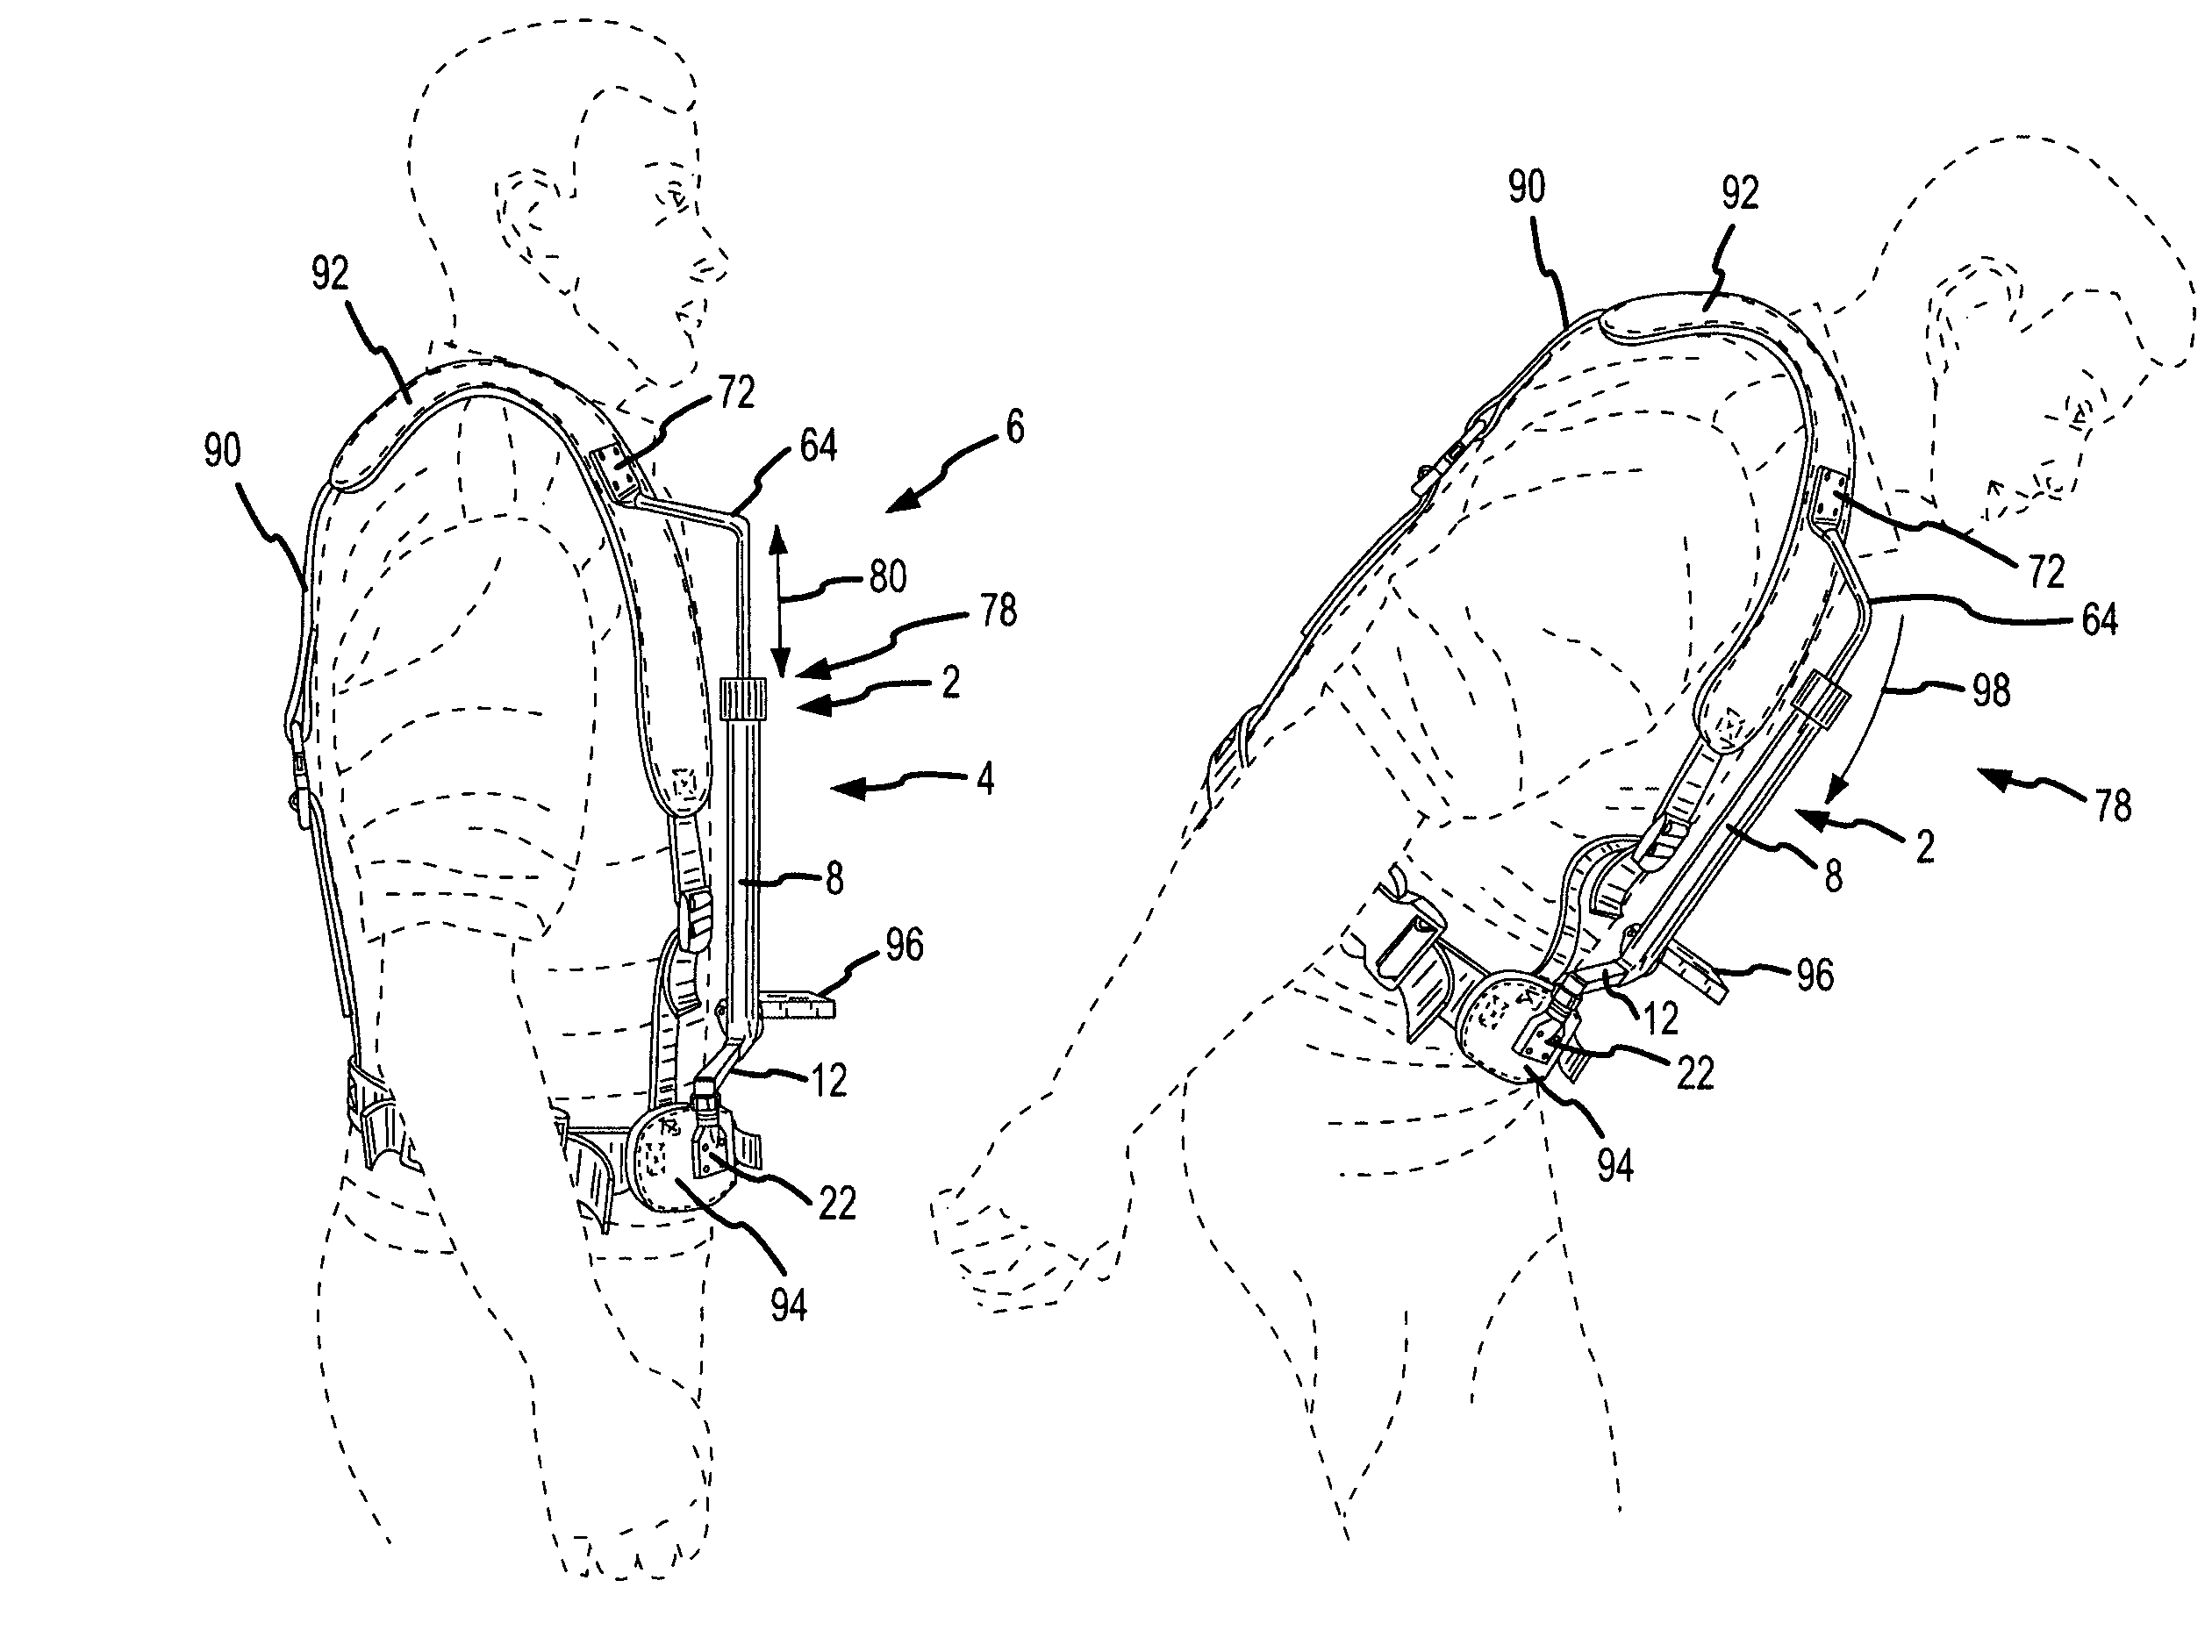 System for carrying articles at the front torso of a human being